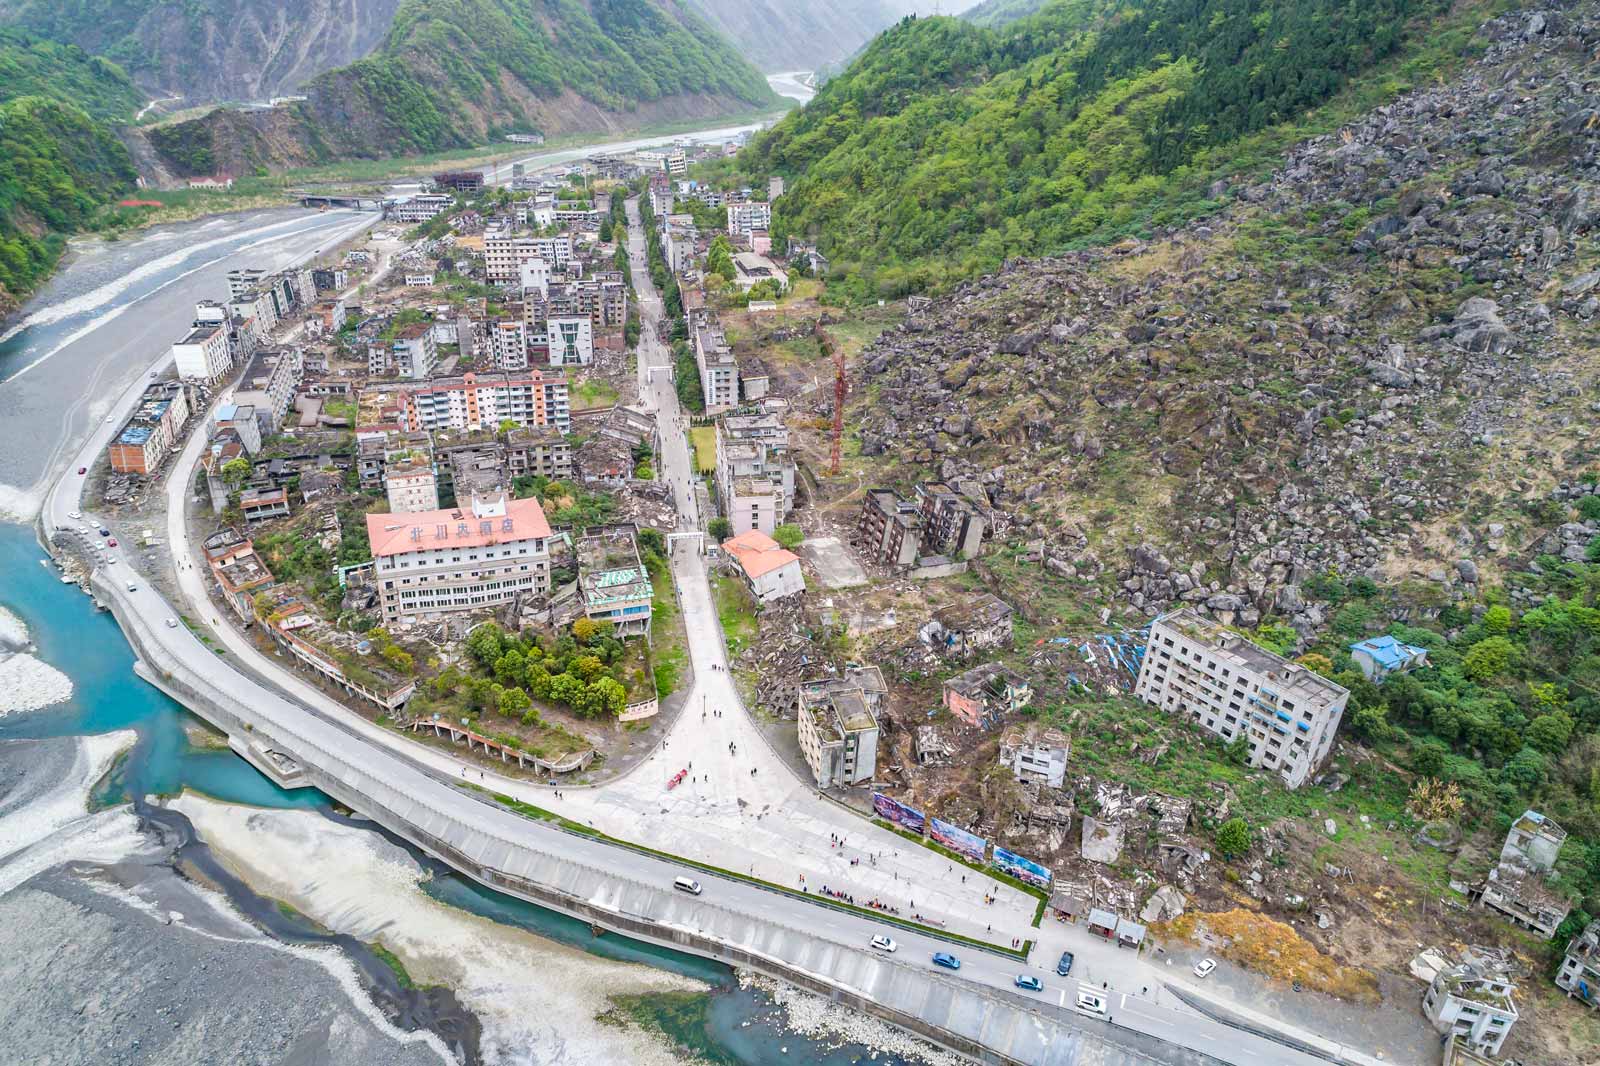 After-Shocks of the 2008 Sichuan Earthquake